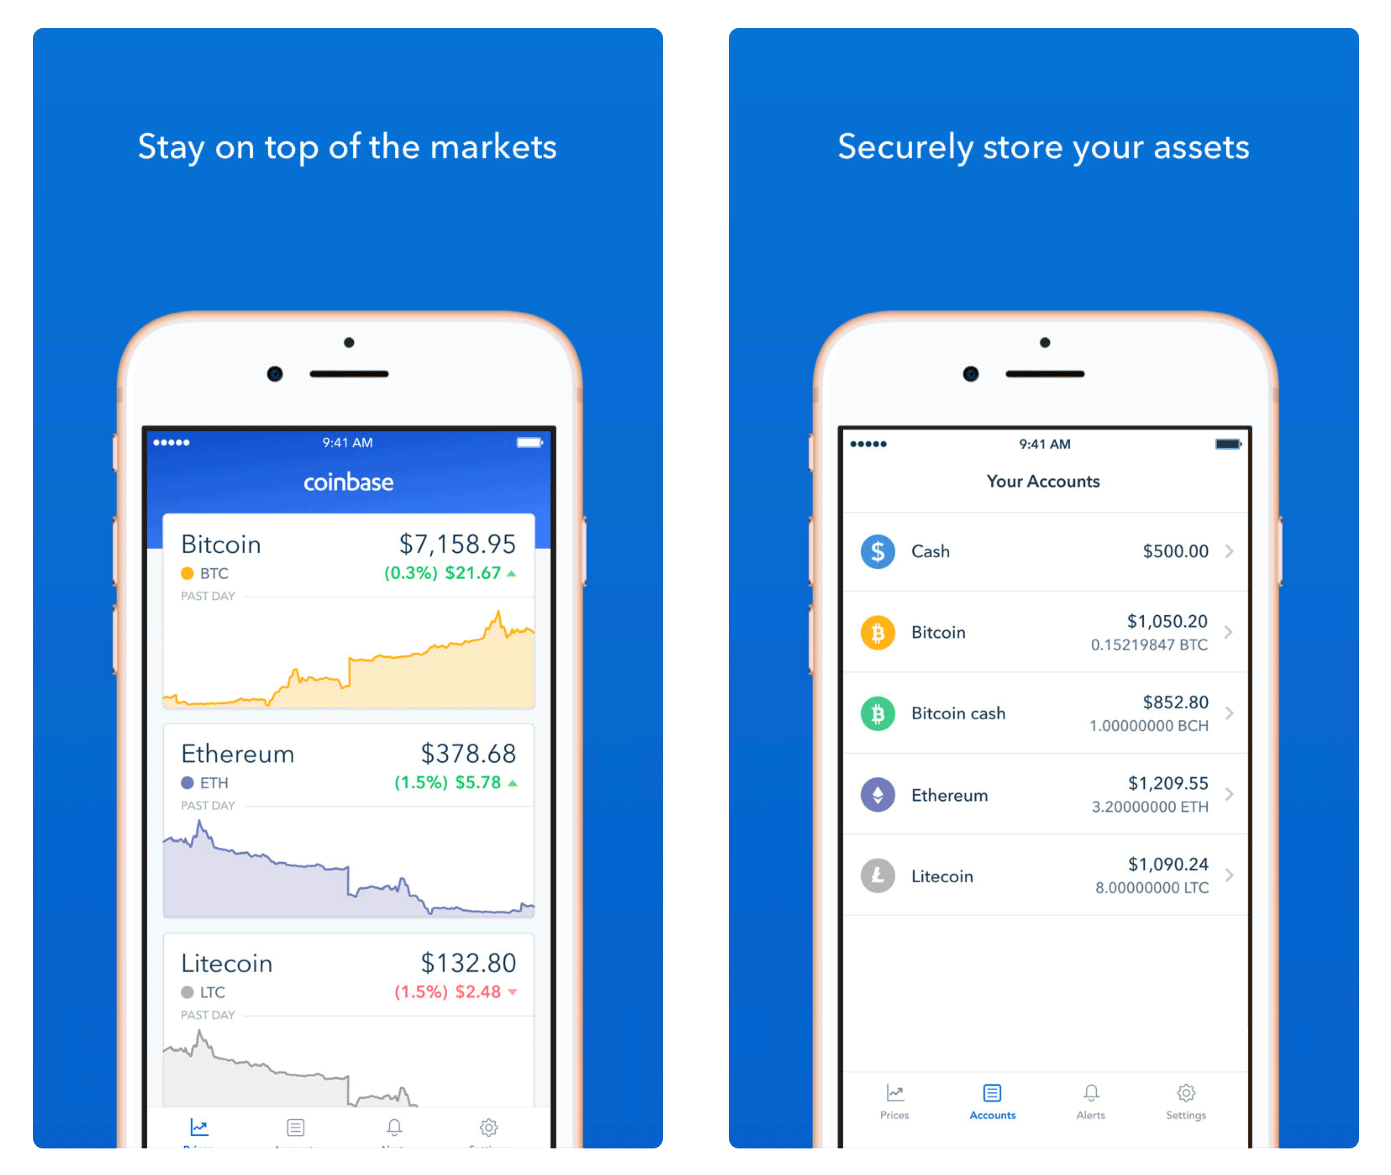 Cryptocurrency App Coinbase lets you stay on top of markets and secure your assets. This image shows Coinbase's market and asset screens.